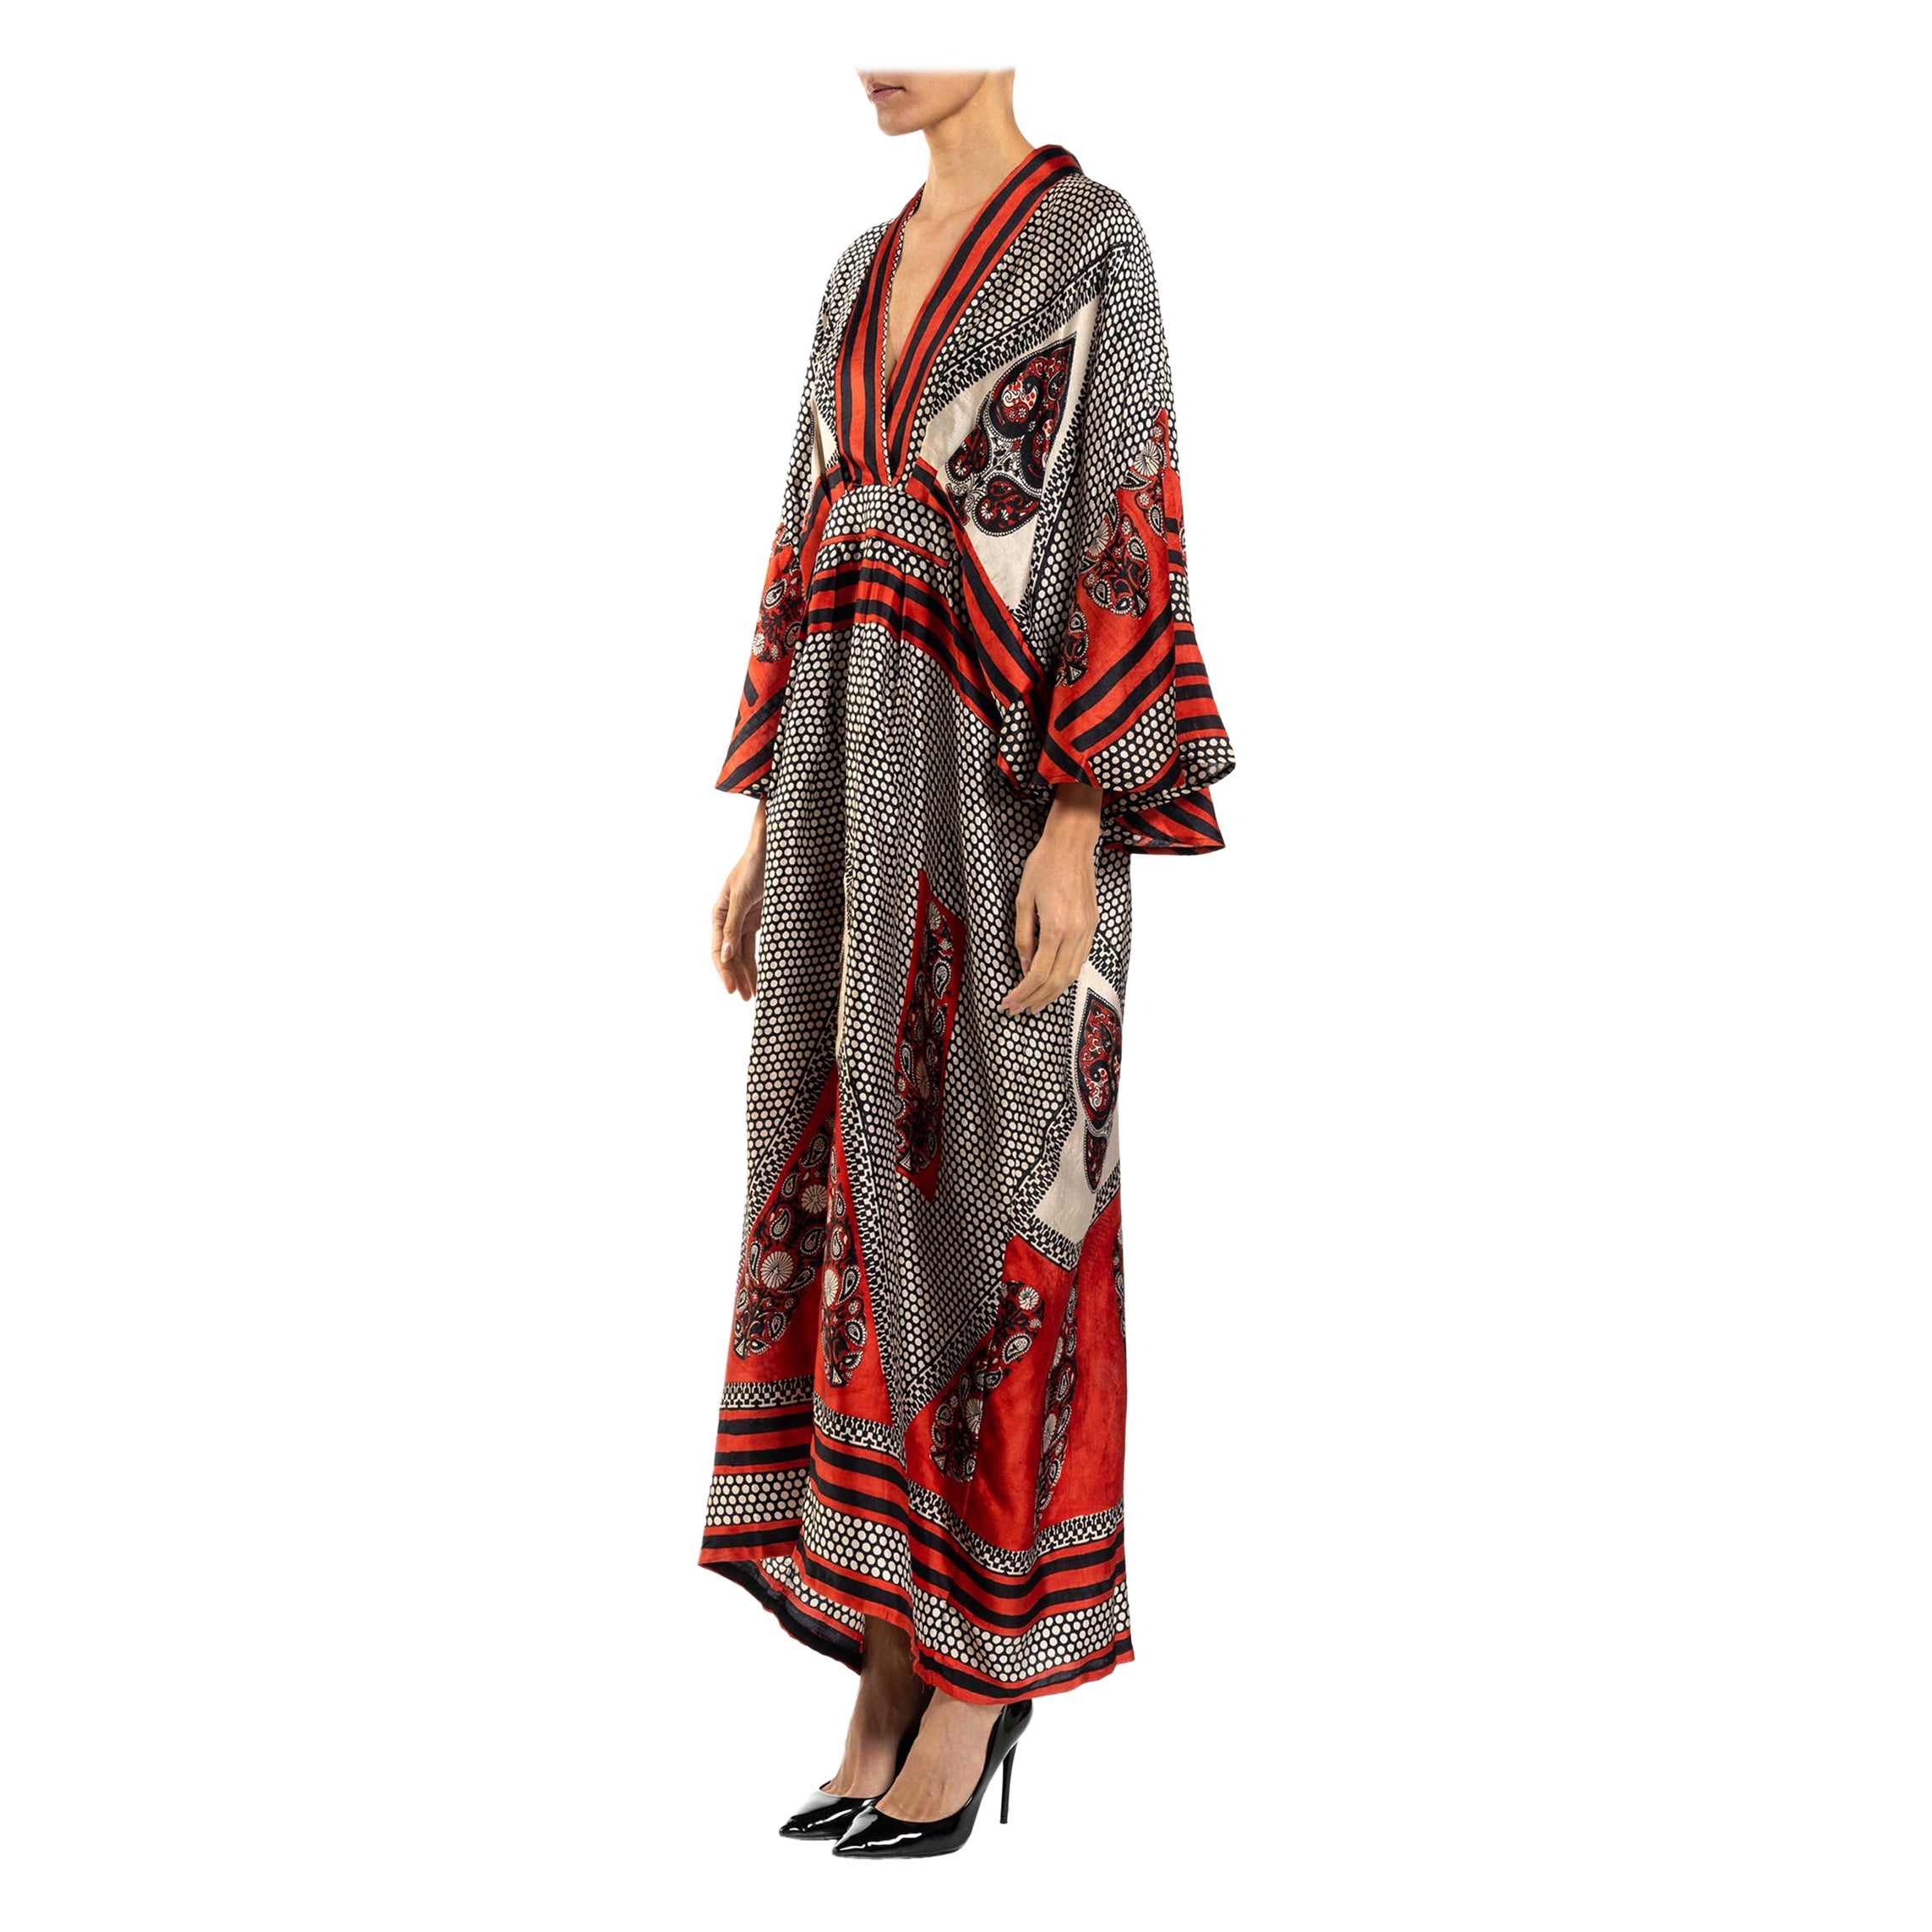 MORPHEW COLLECTION Red, Black & White Polka Dot Silk Kaftan Made From Vintage S